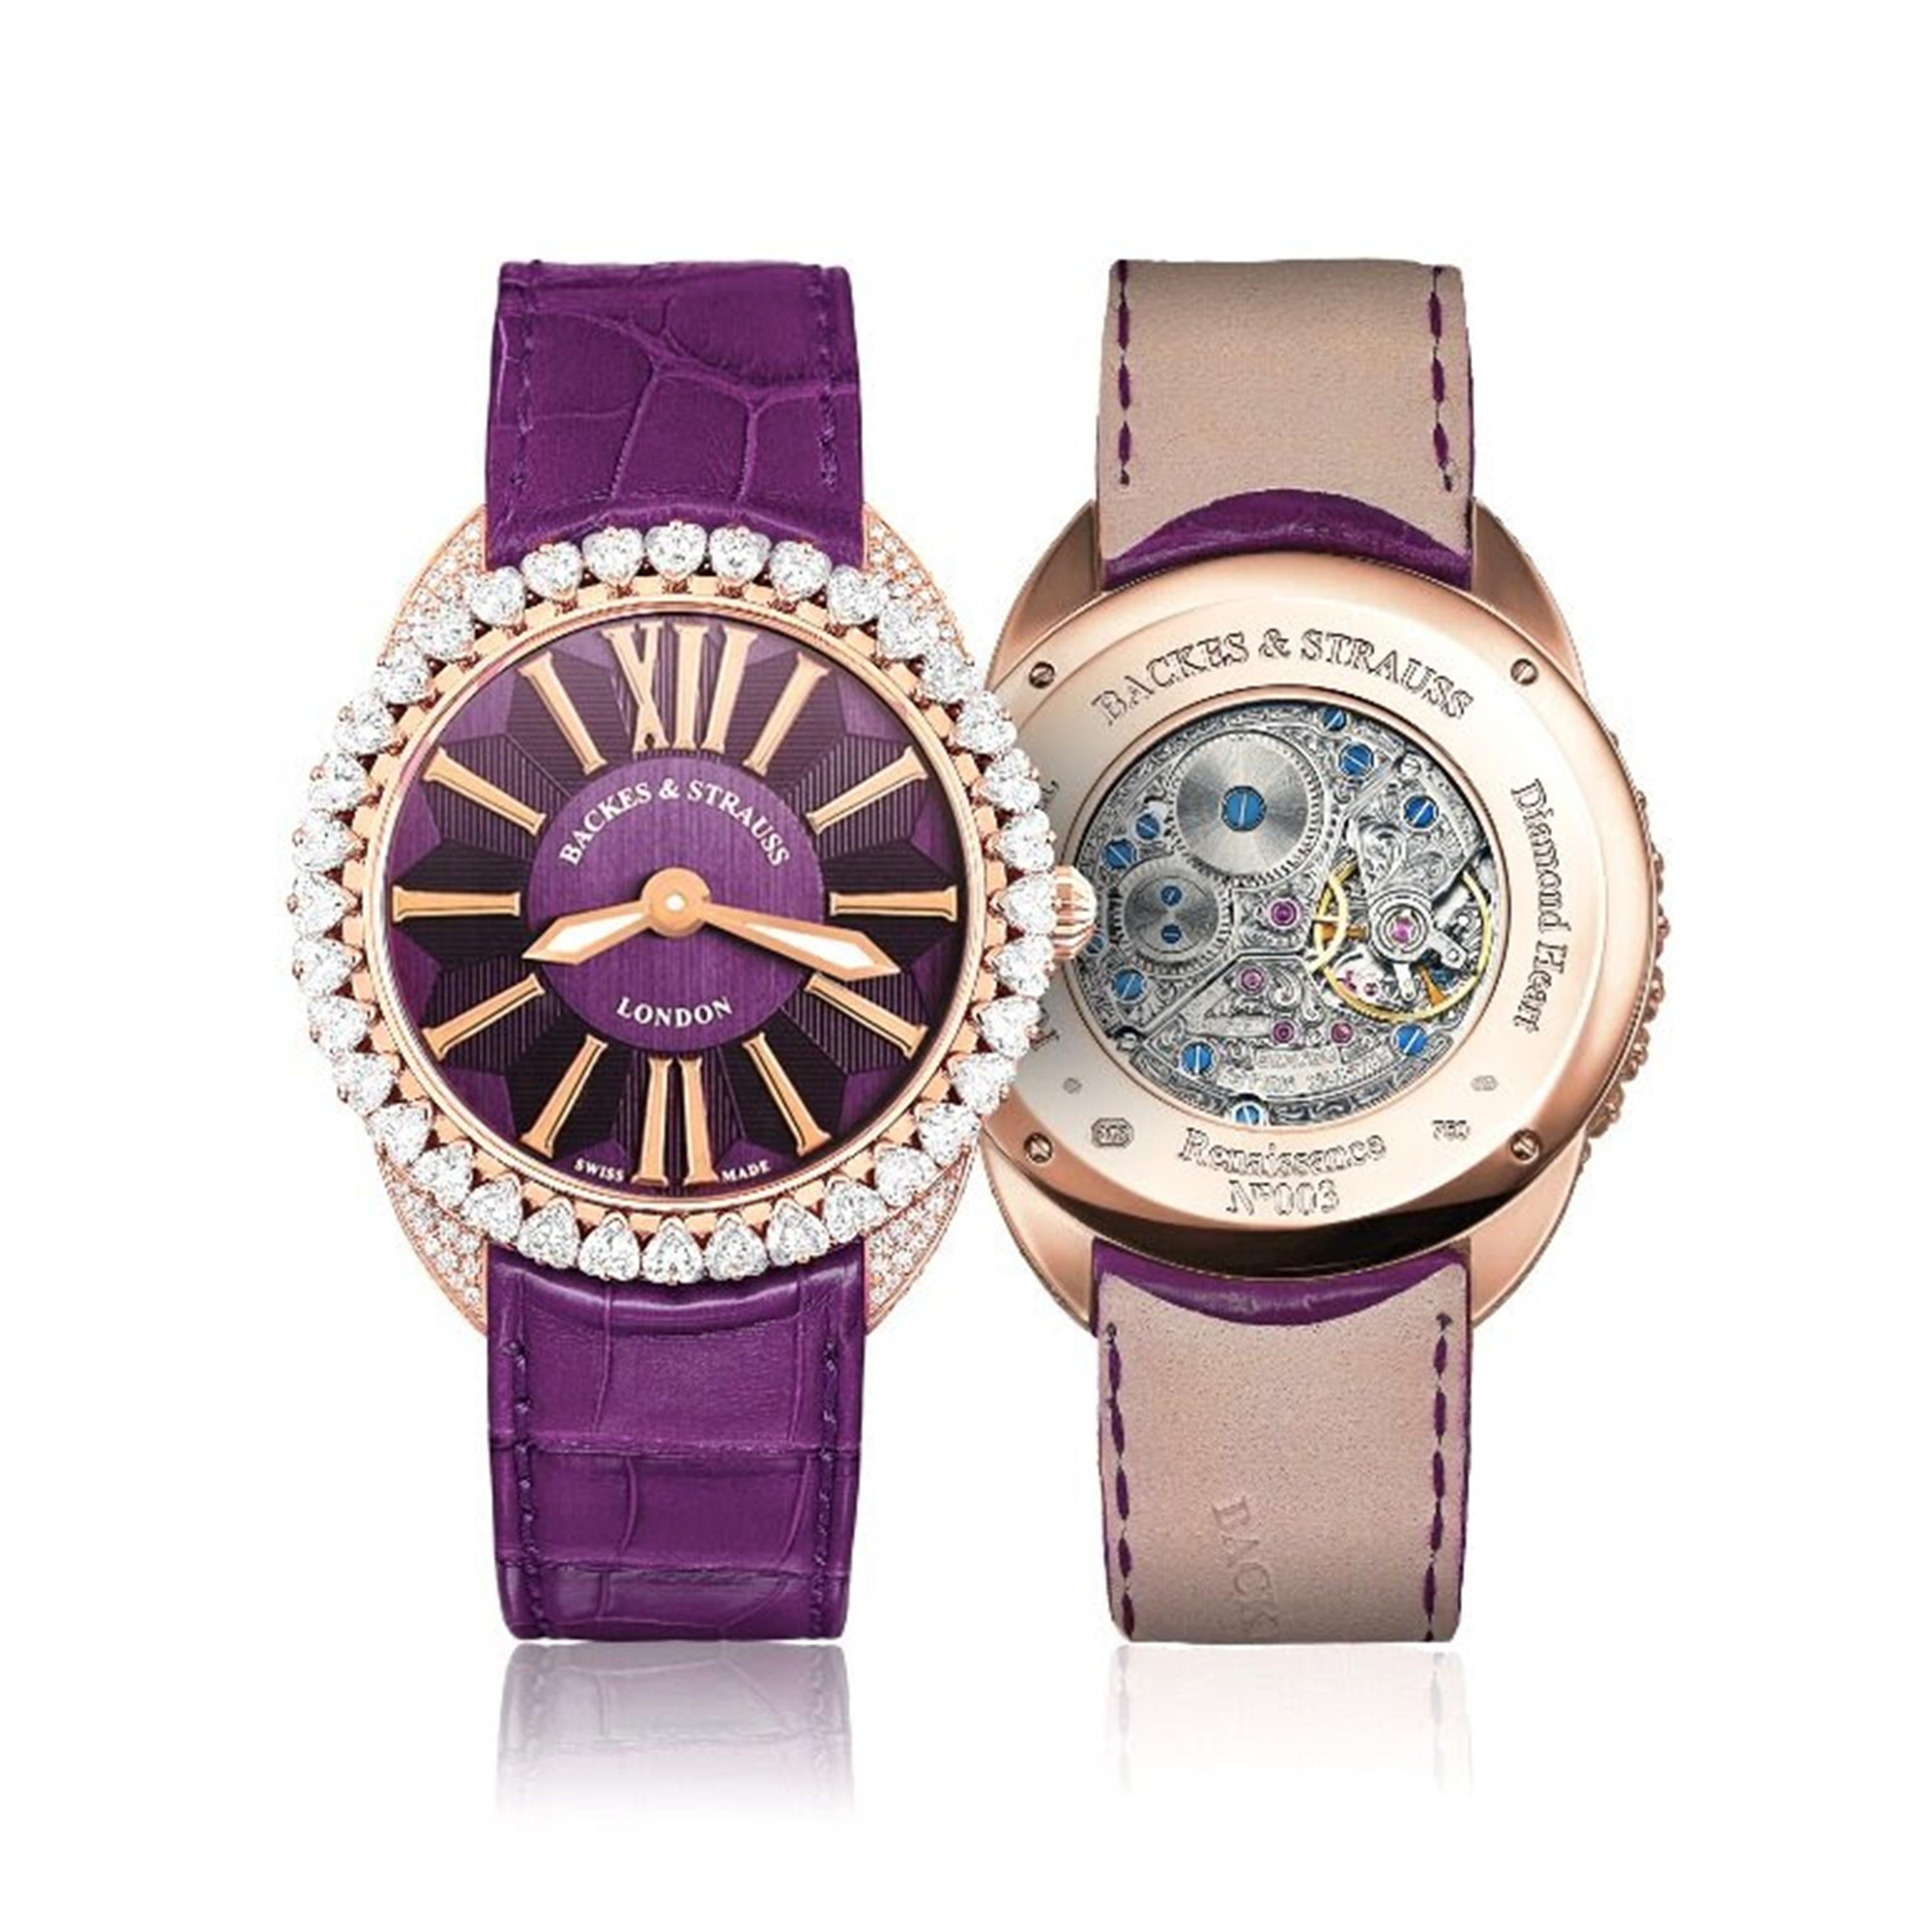 The Piccadilly Renaissance Diamond Heart 40 is a luxury diamond watch for women crafted in 18kt Rose gold, featuring the purple dial and white gold roman numerals, mechanical movement. The case, bezel and buckle are set with white Ideal Cut and